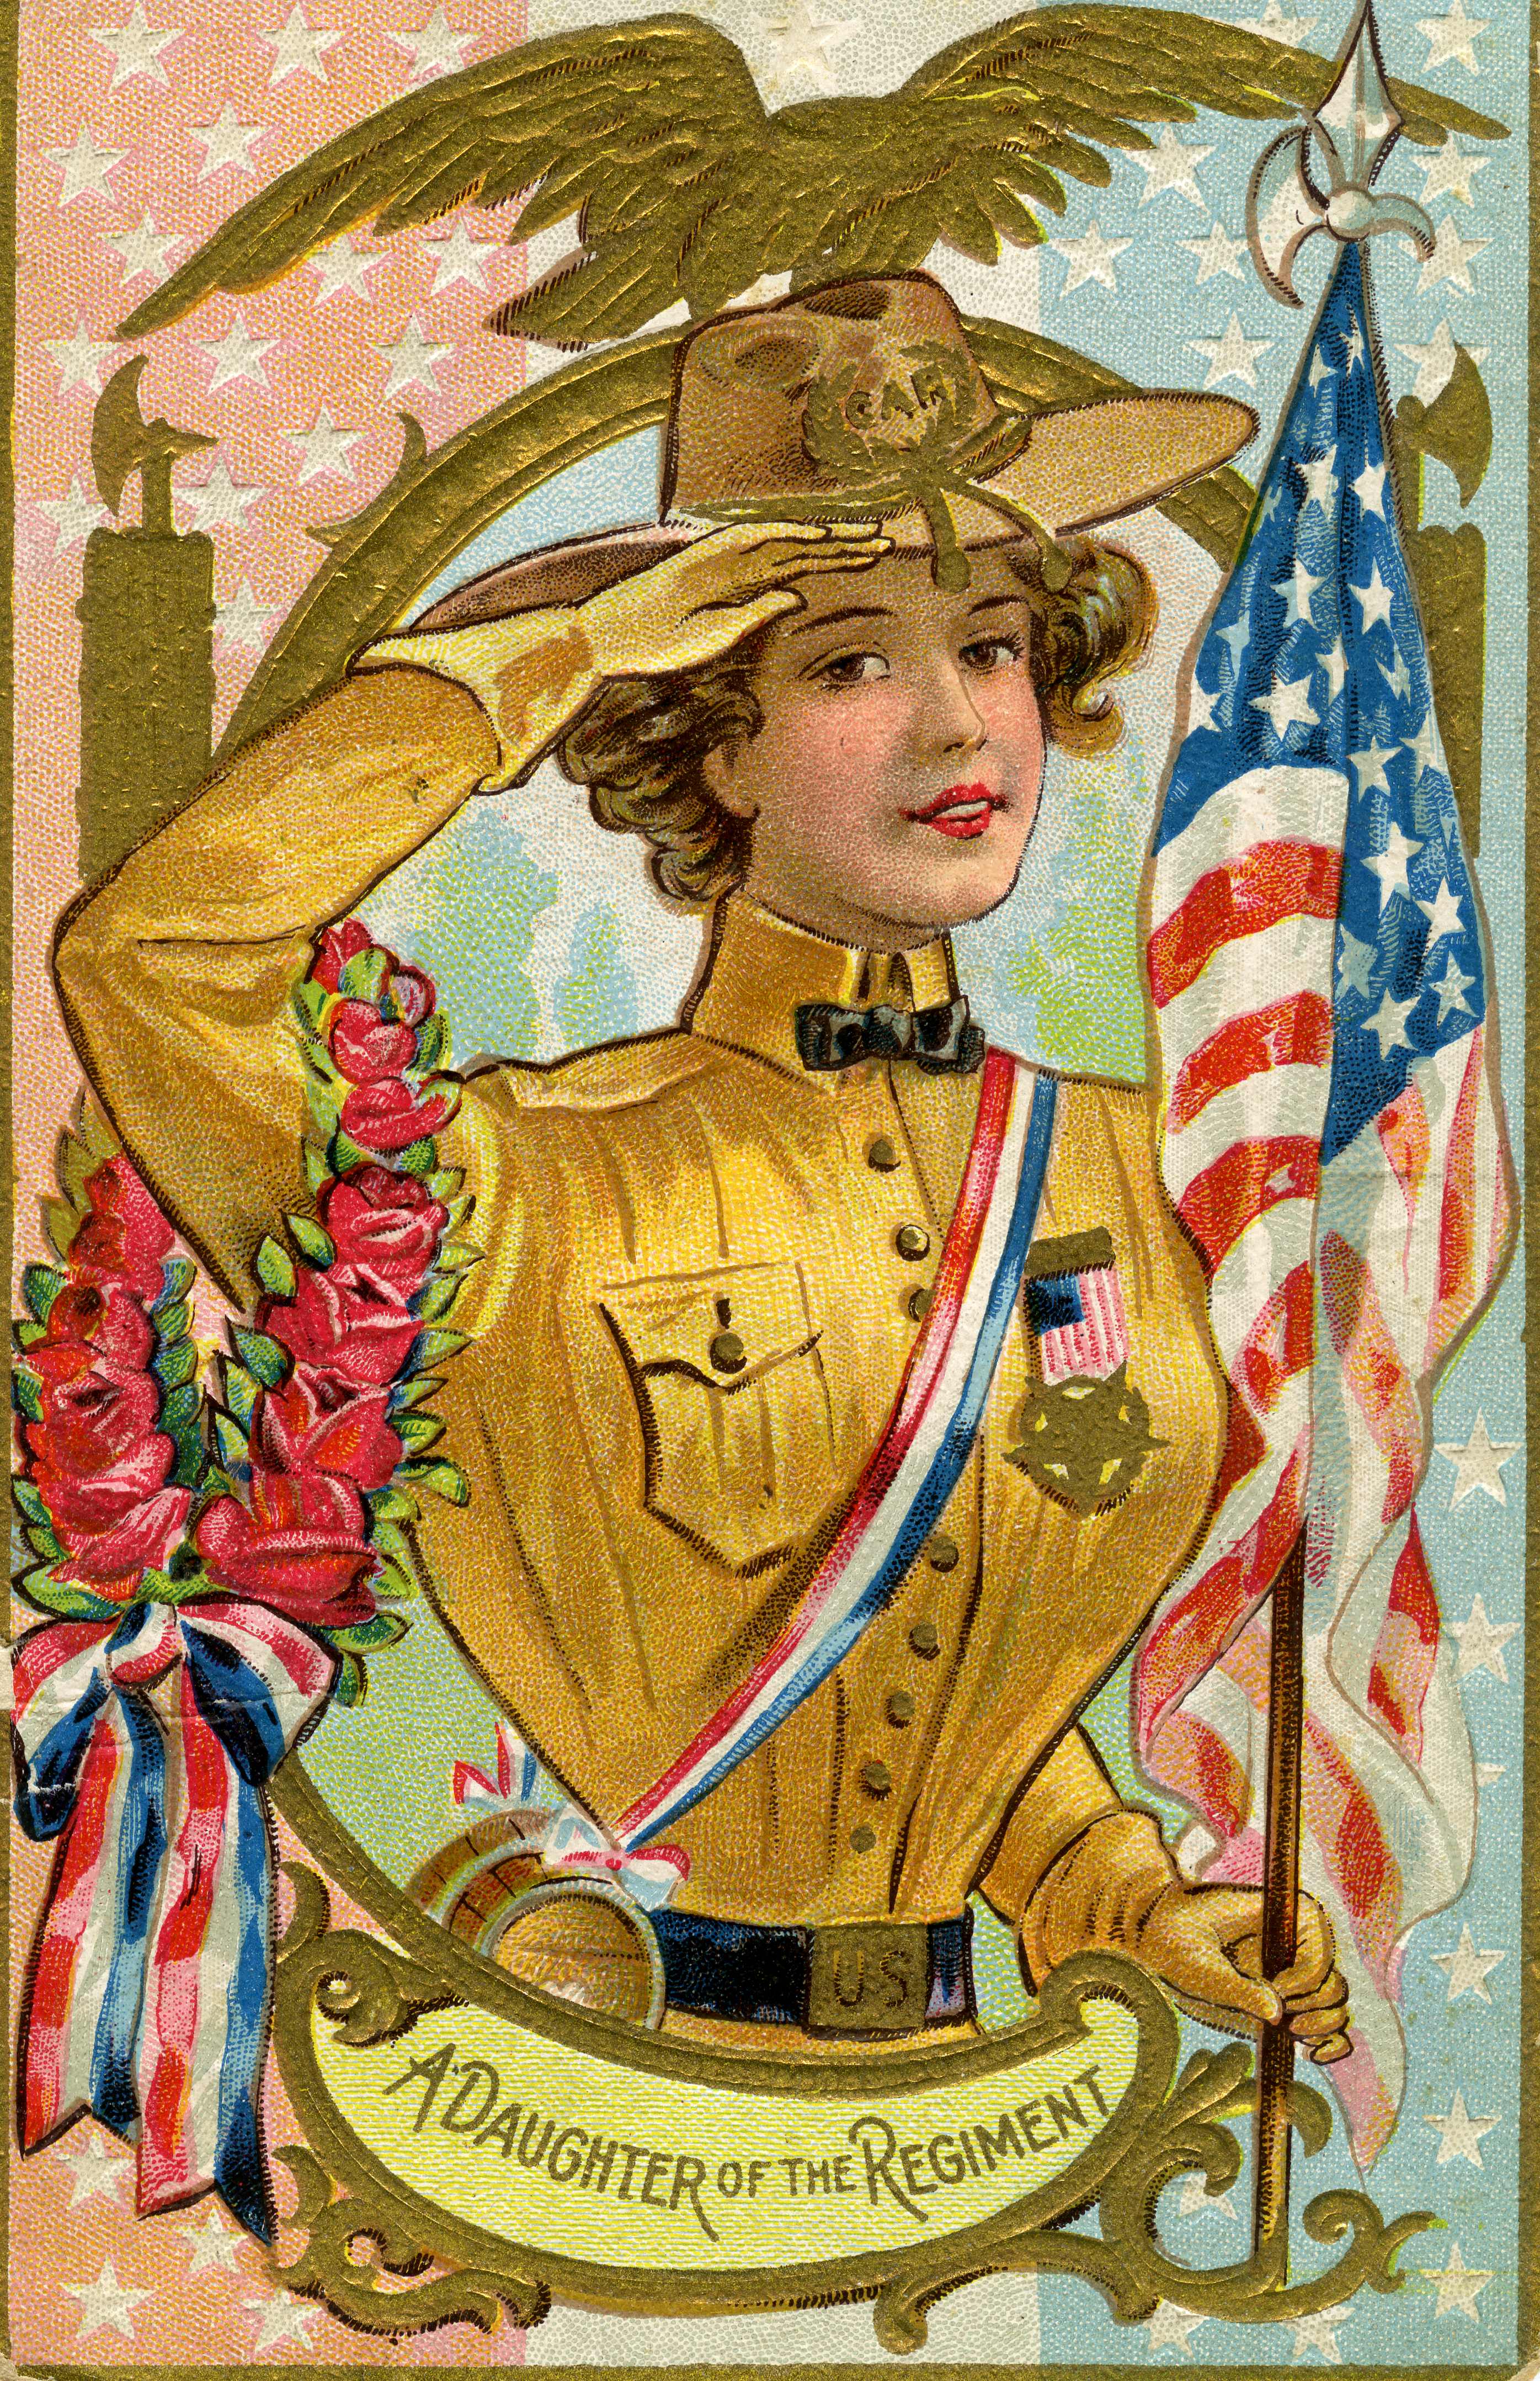 Postcard with a color illustration of a woman in Grand Army of the Republic dress. Text reads "A Daughter of the Regiment".